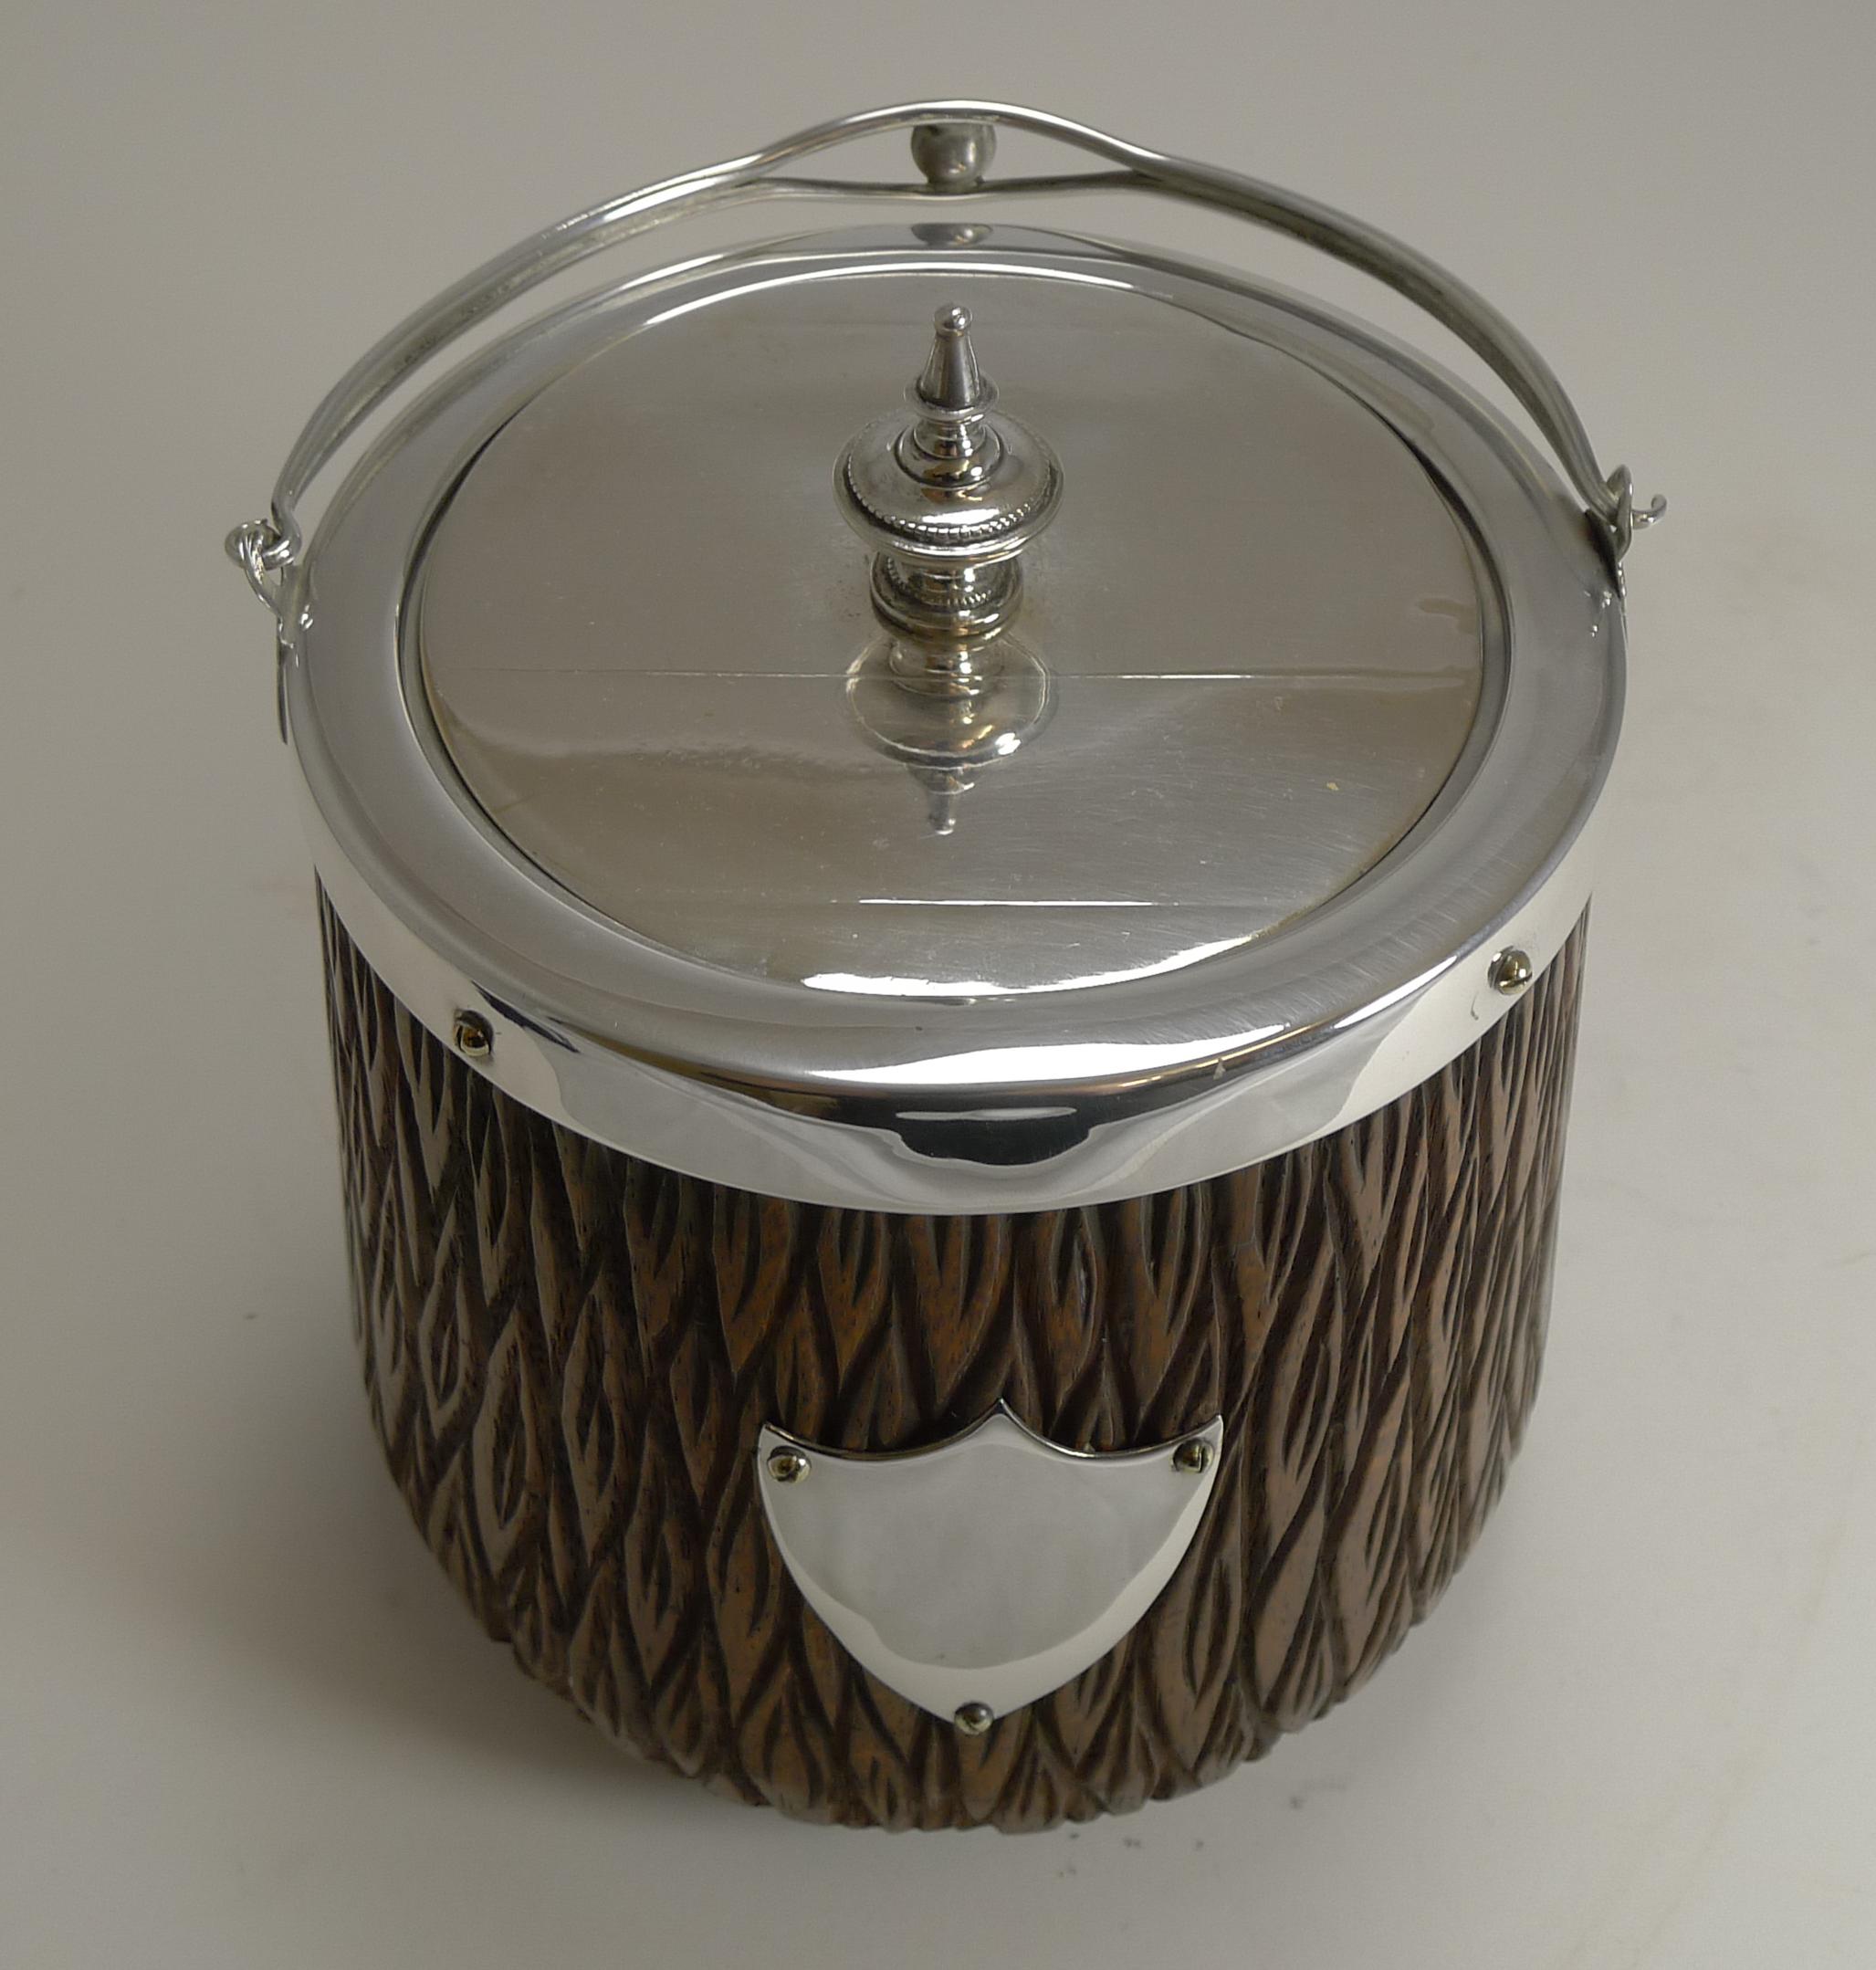 Late 19th Century Antique English Hand-Carved Oak and Silver Plate Biscuit Box / Barrel For Sale